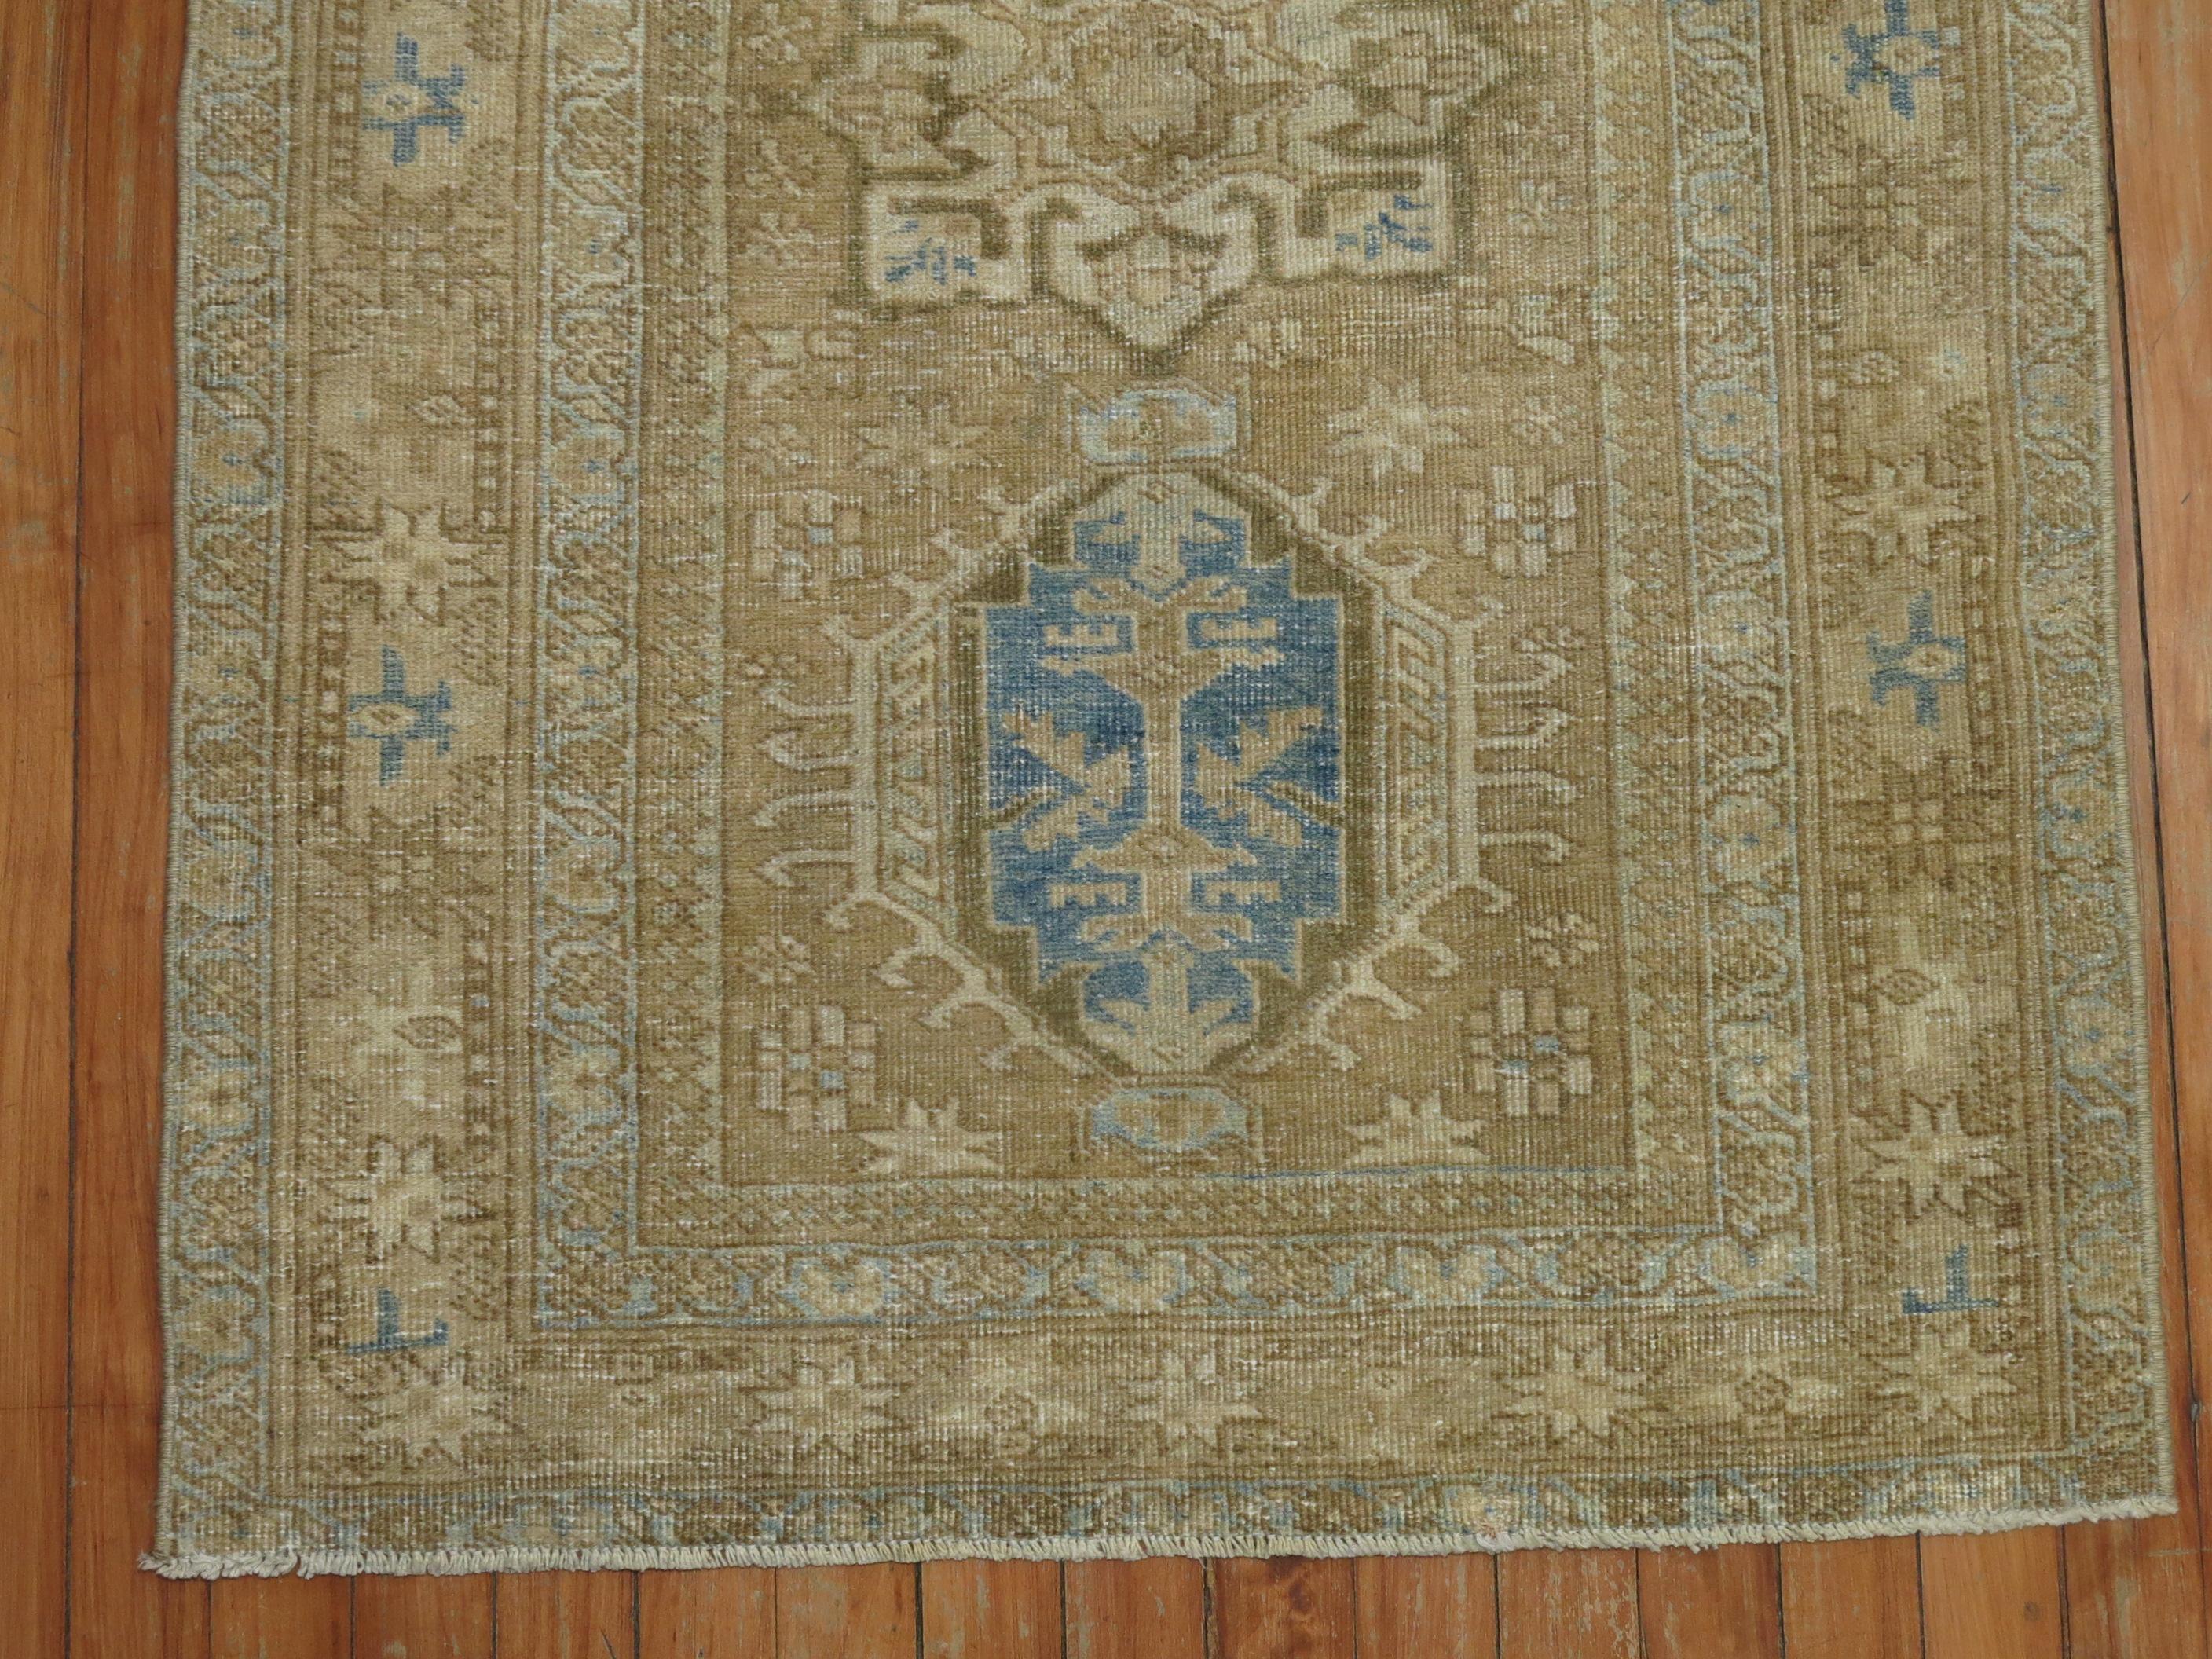 Casual best describe this one of a kind antique Persian Heriz scatter rug.